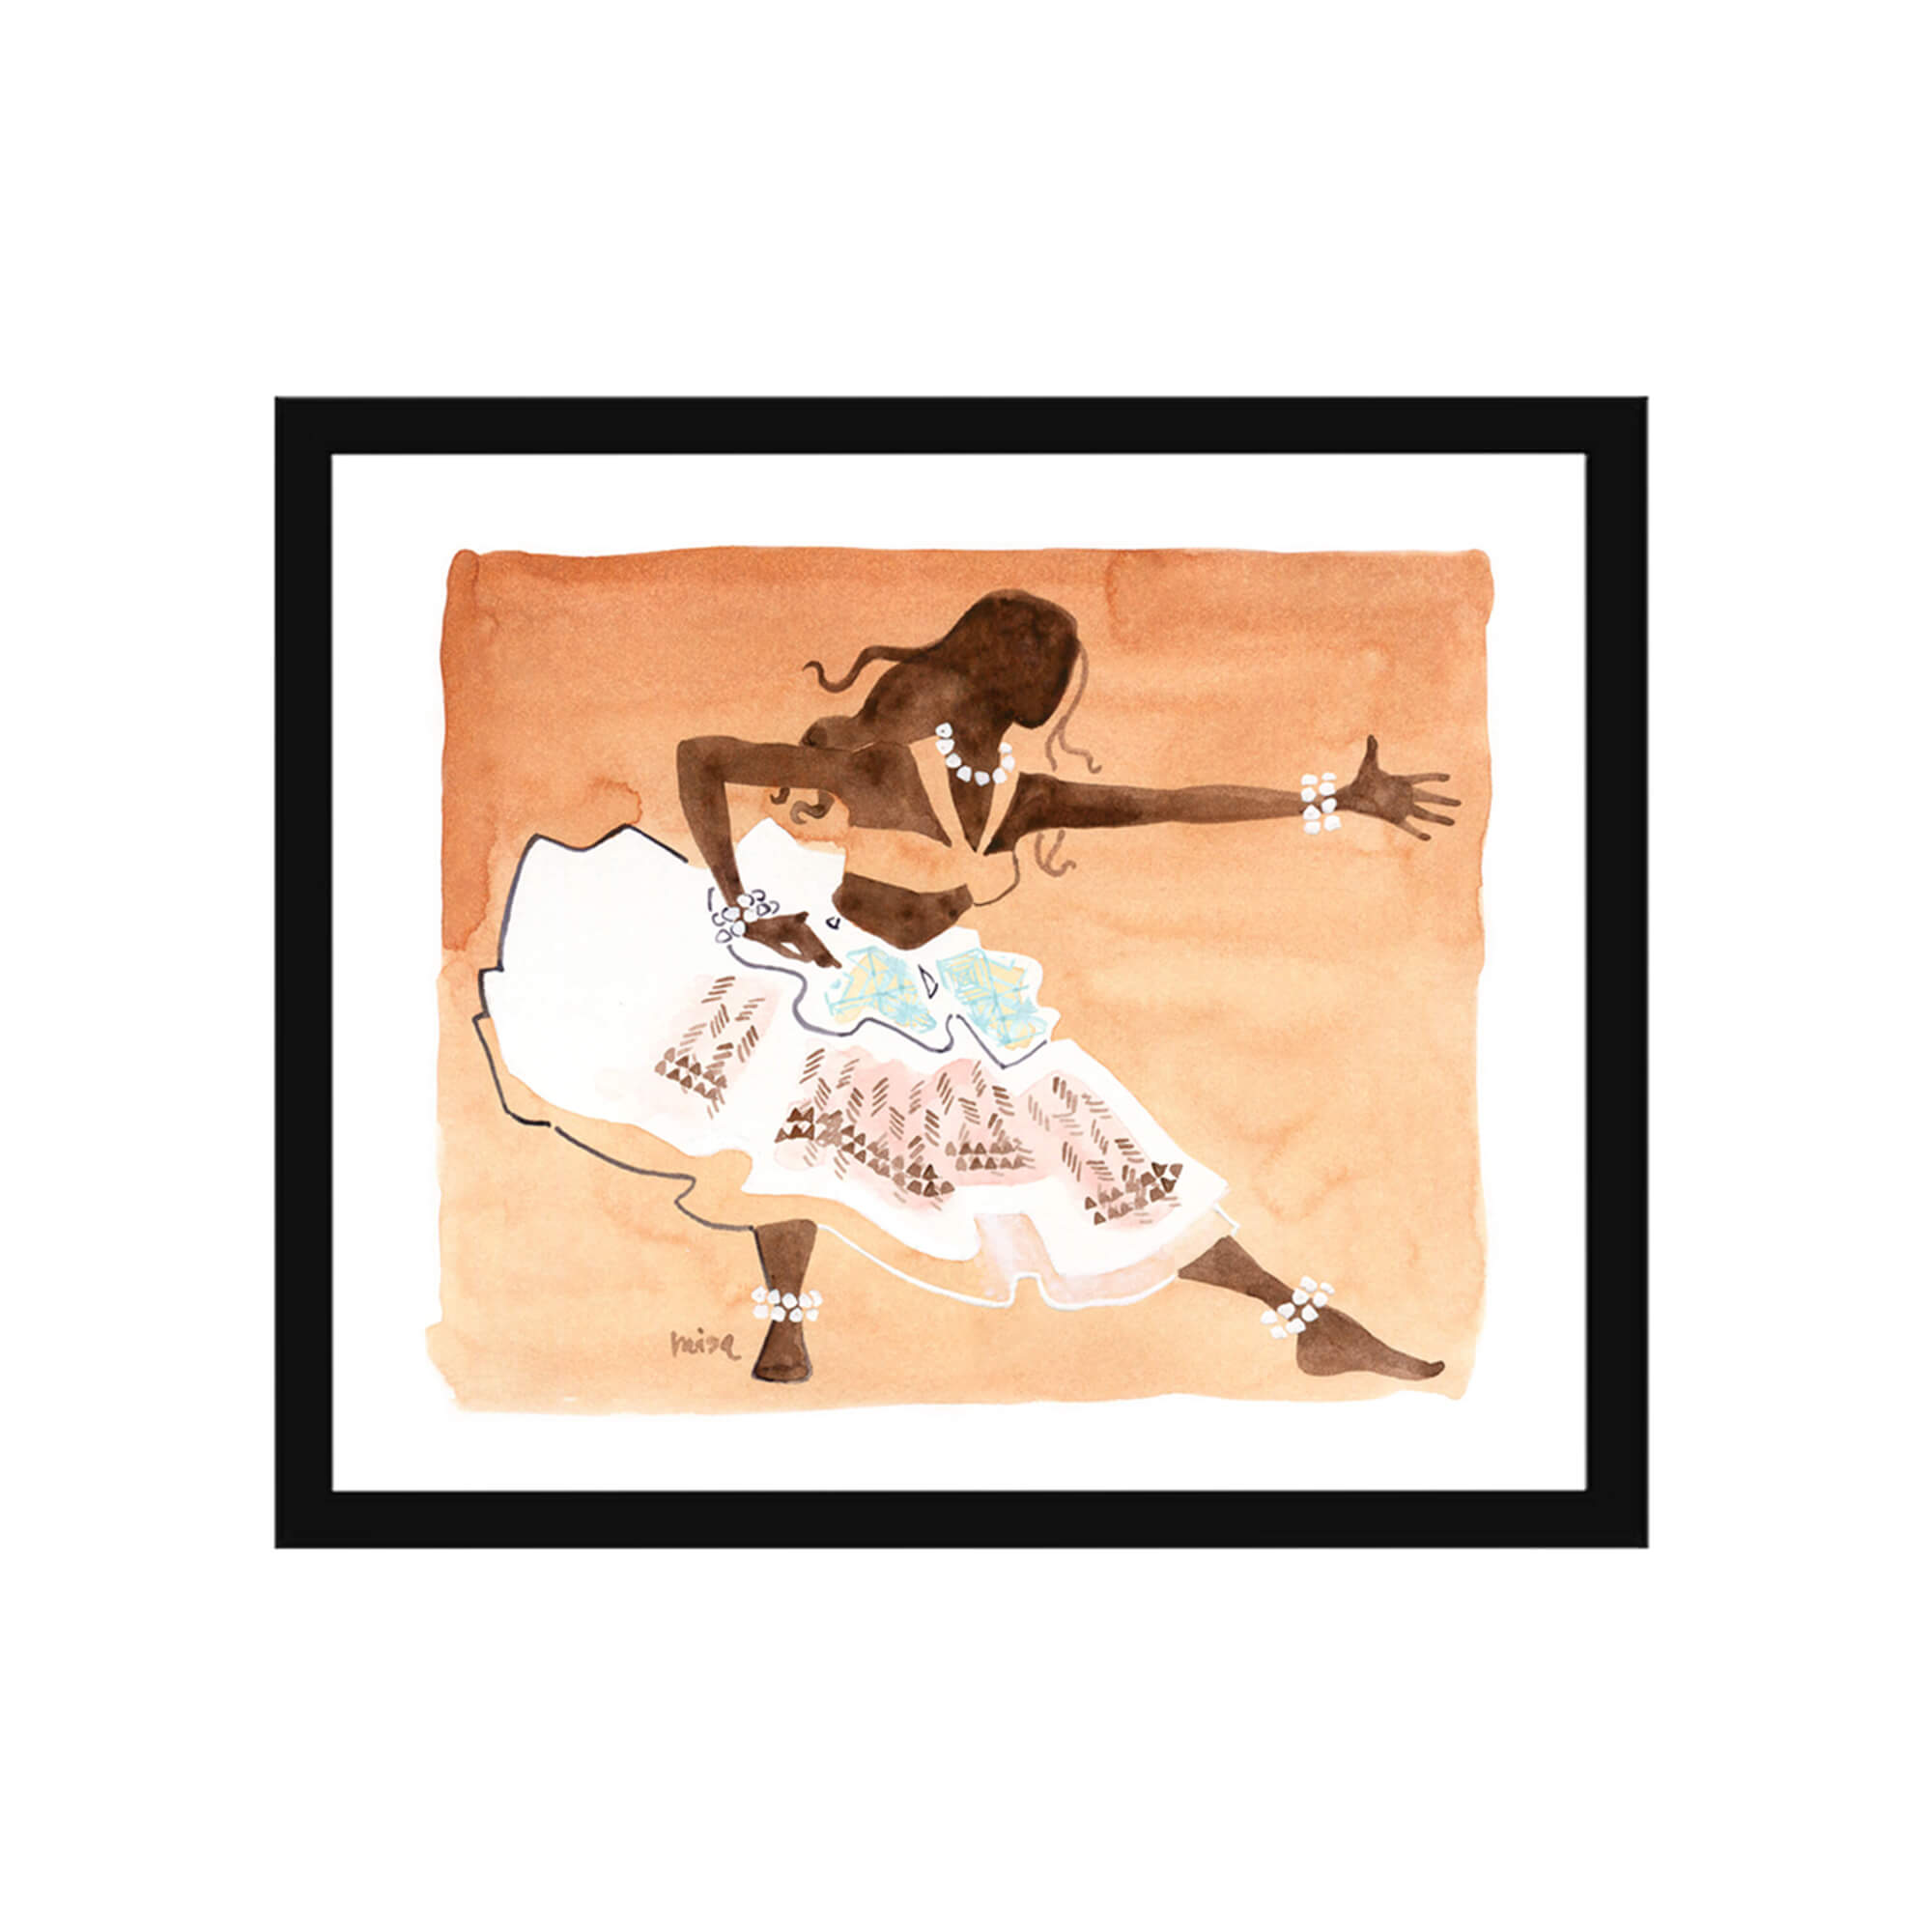 Framed paper giclée print of a watercolor artwork featuring a hula dancer on a sandy brown background by Hawaii artist Lovisa Oliv